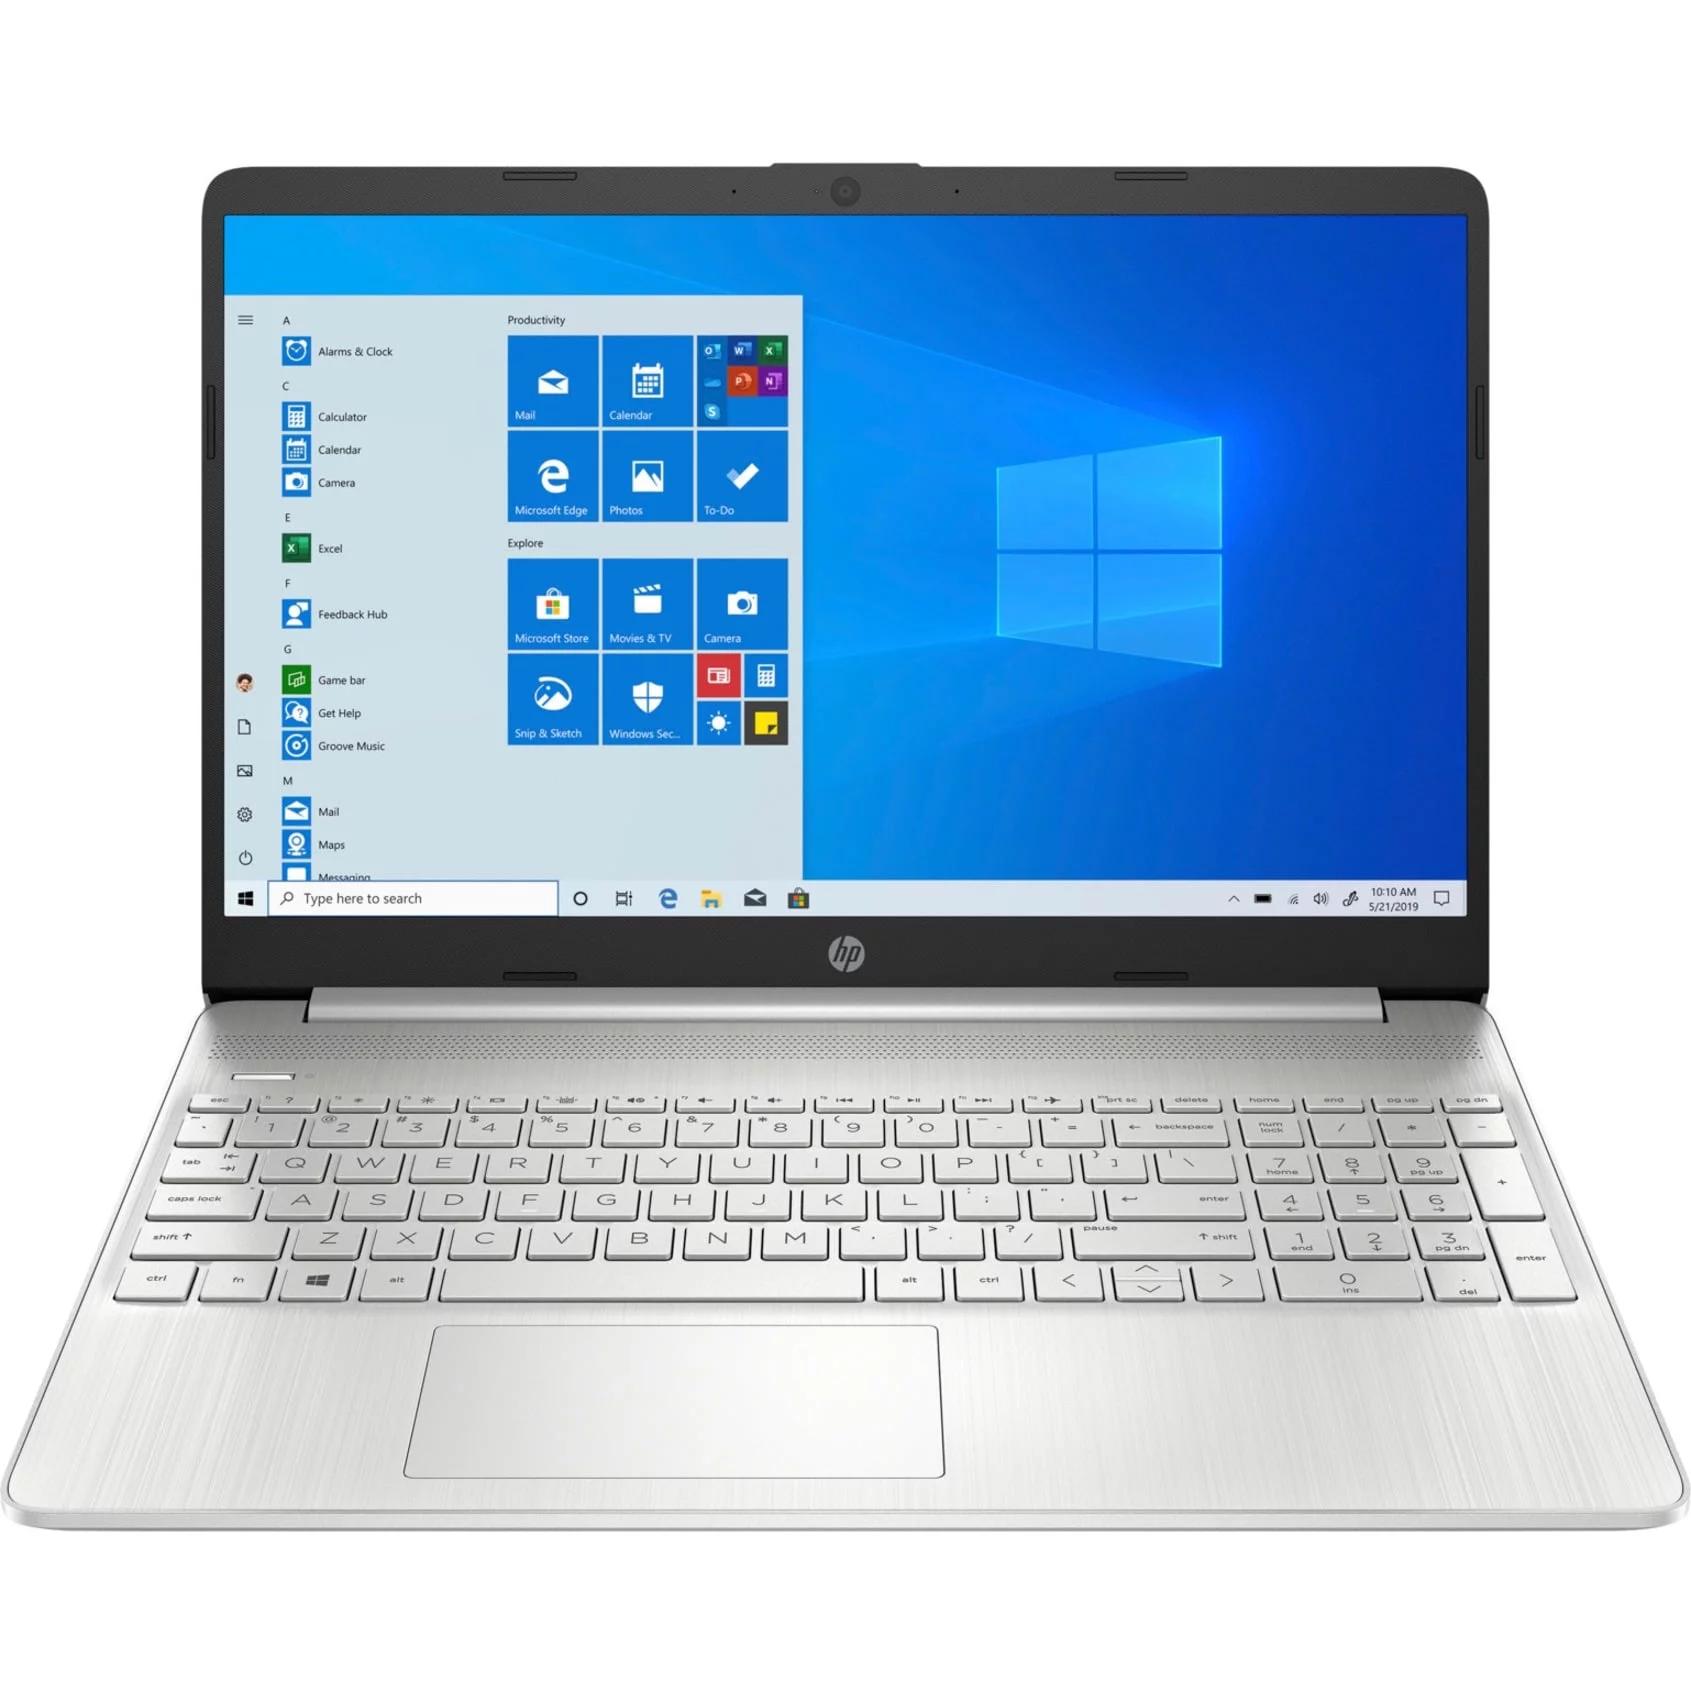 Hp pavilion touch screen laptop: functionality and style